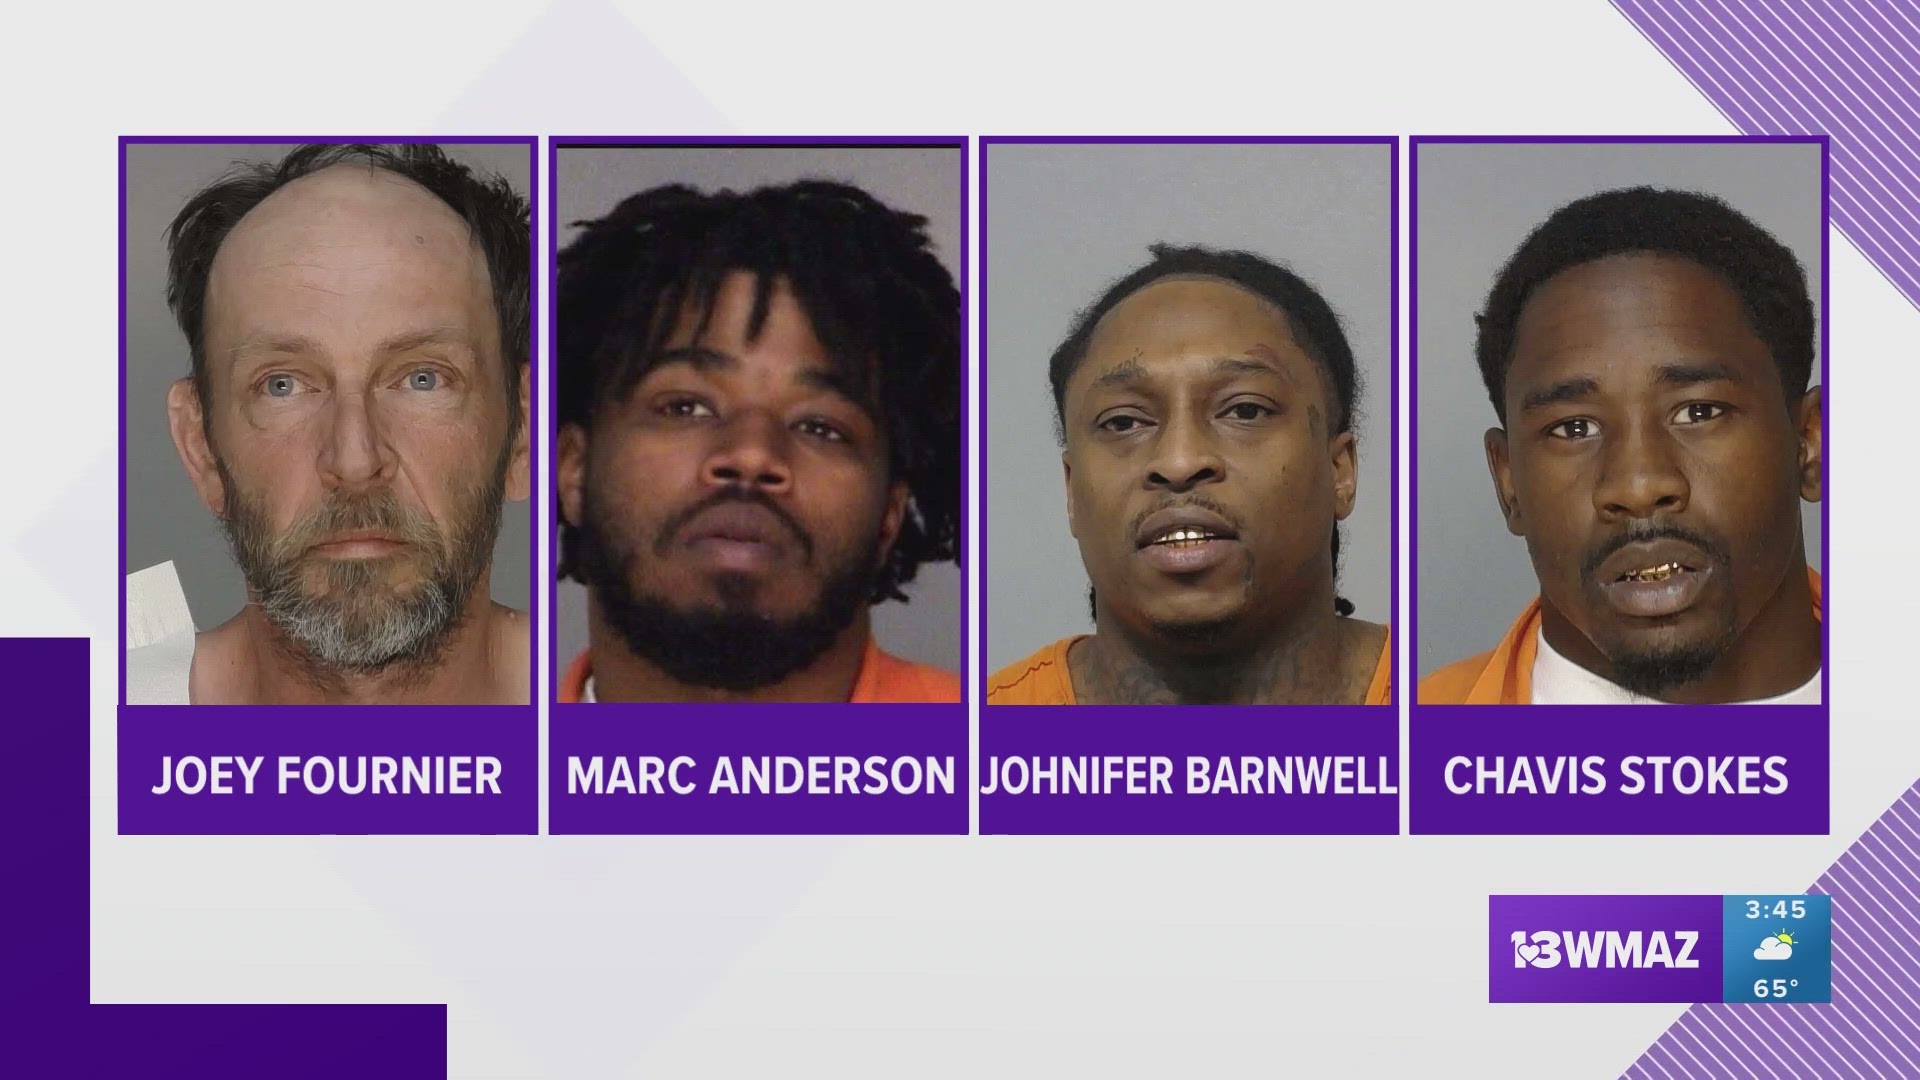 The four men include an accused murderer, one held for the U.S. Marshals, one accused of aggravated assault and another held for drug trafficking.